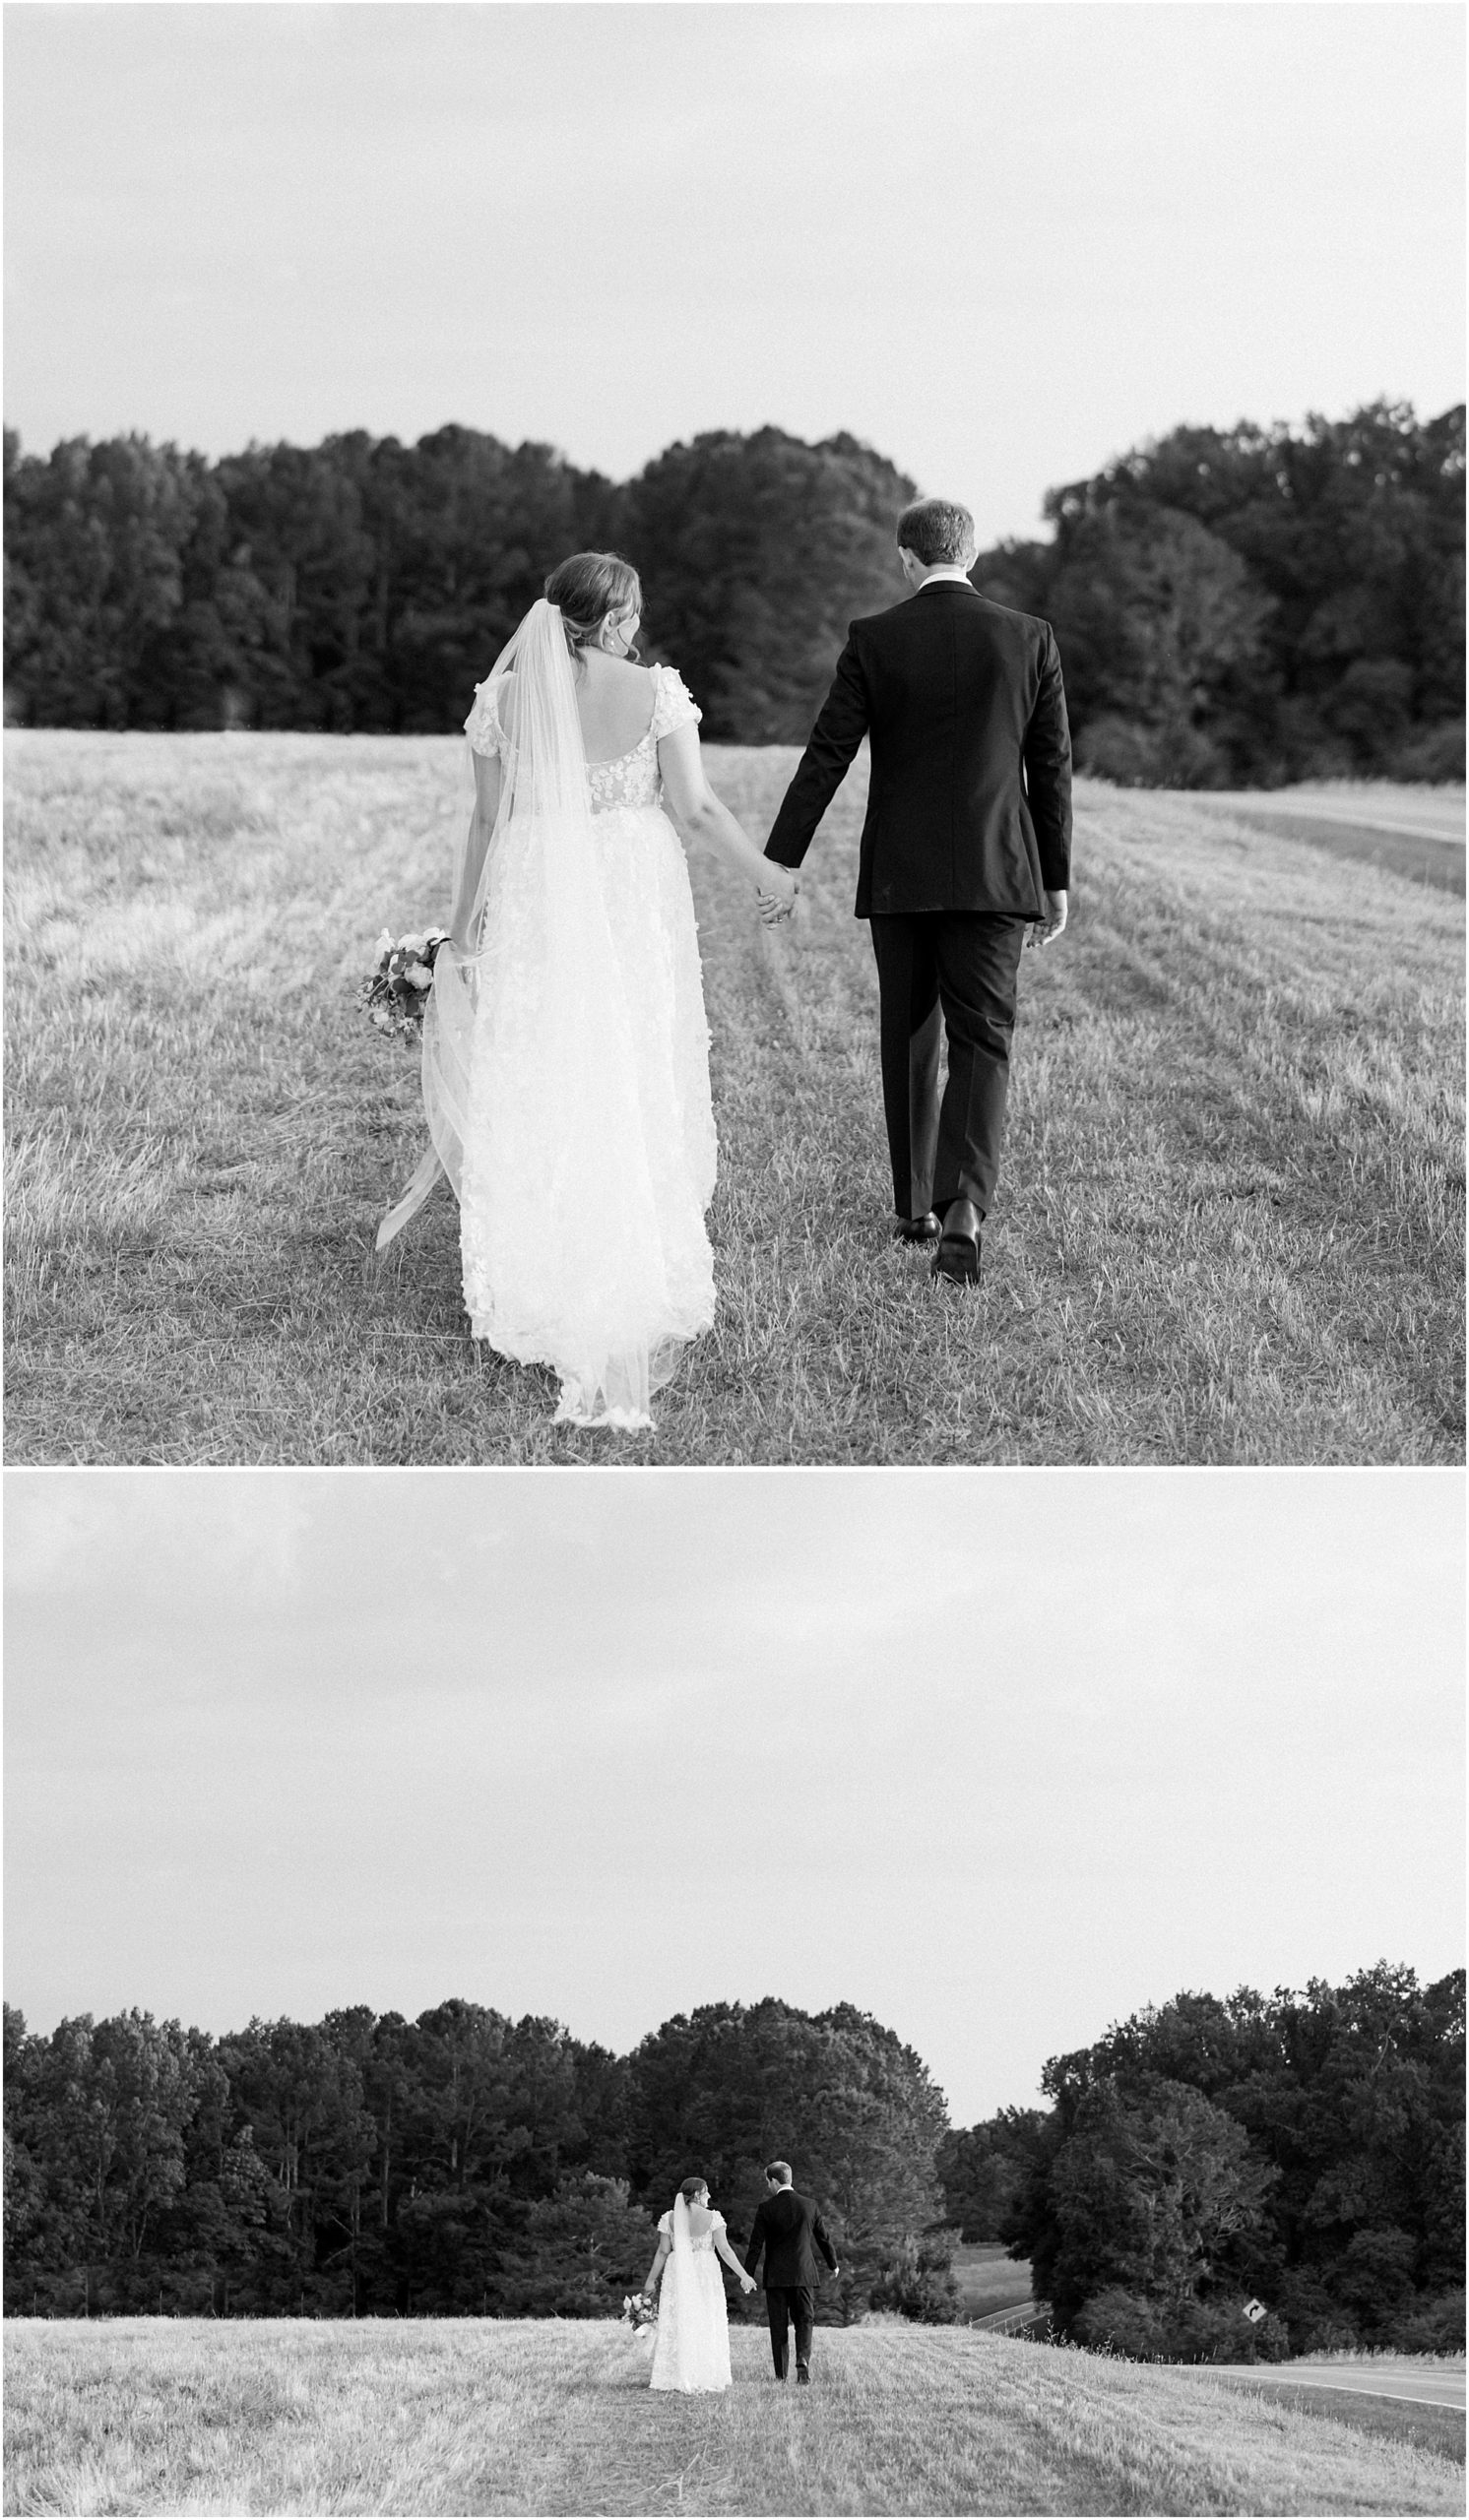 Bride and groom portraits in black and white. Bride and groom walking away.